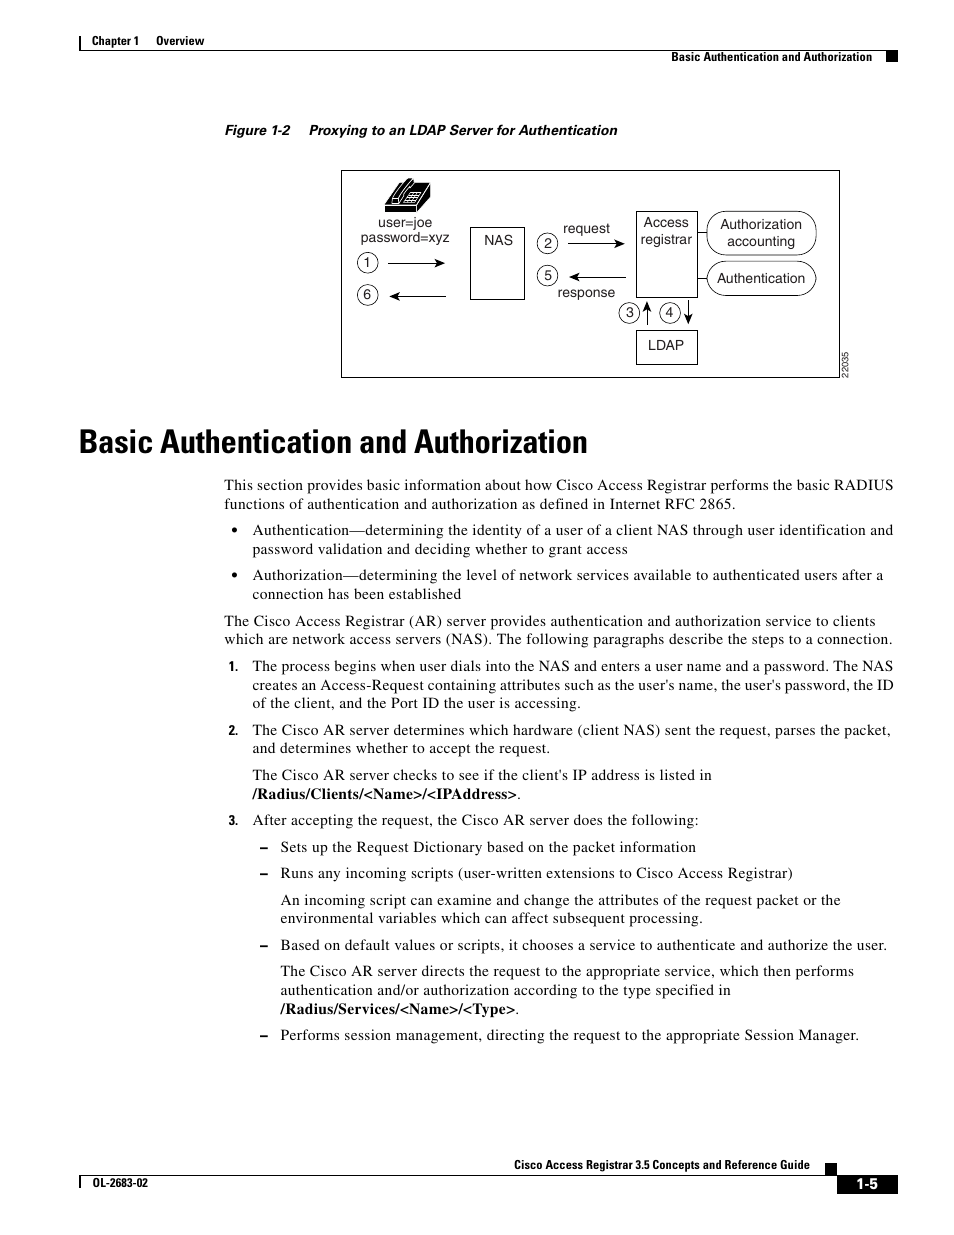 Basic authentication and authorization | Cisco Cisco Access Registrar 3.5 User Manual | Page 17 / 80